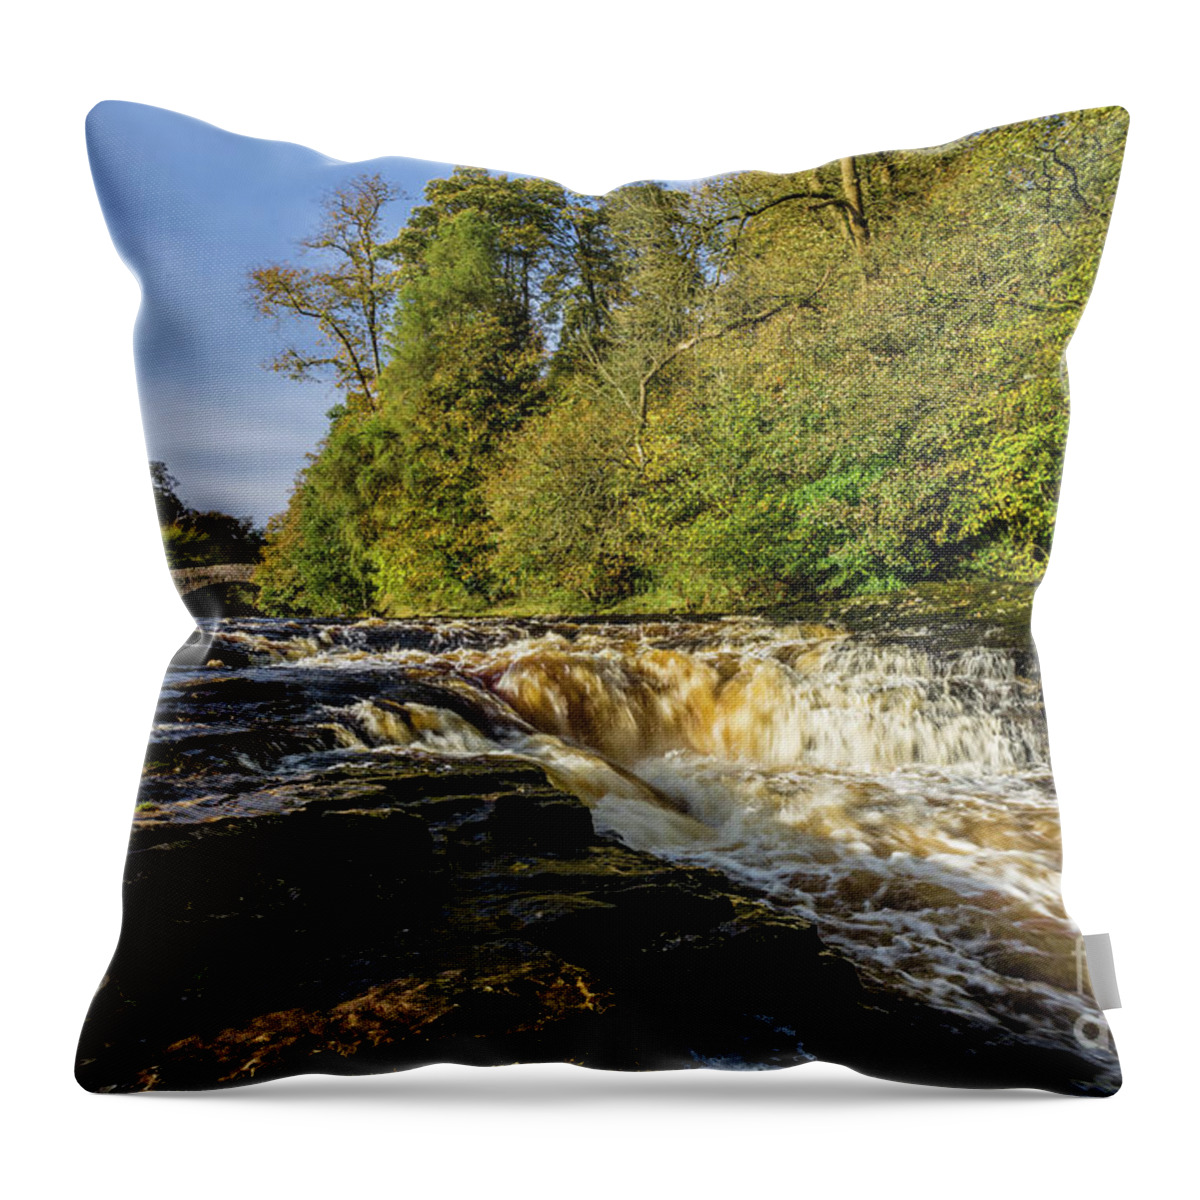 England Throw Pillow featuring the photograph Stainforth Force In Early Autumn by Tom Holmes Photography